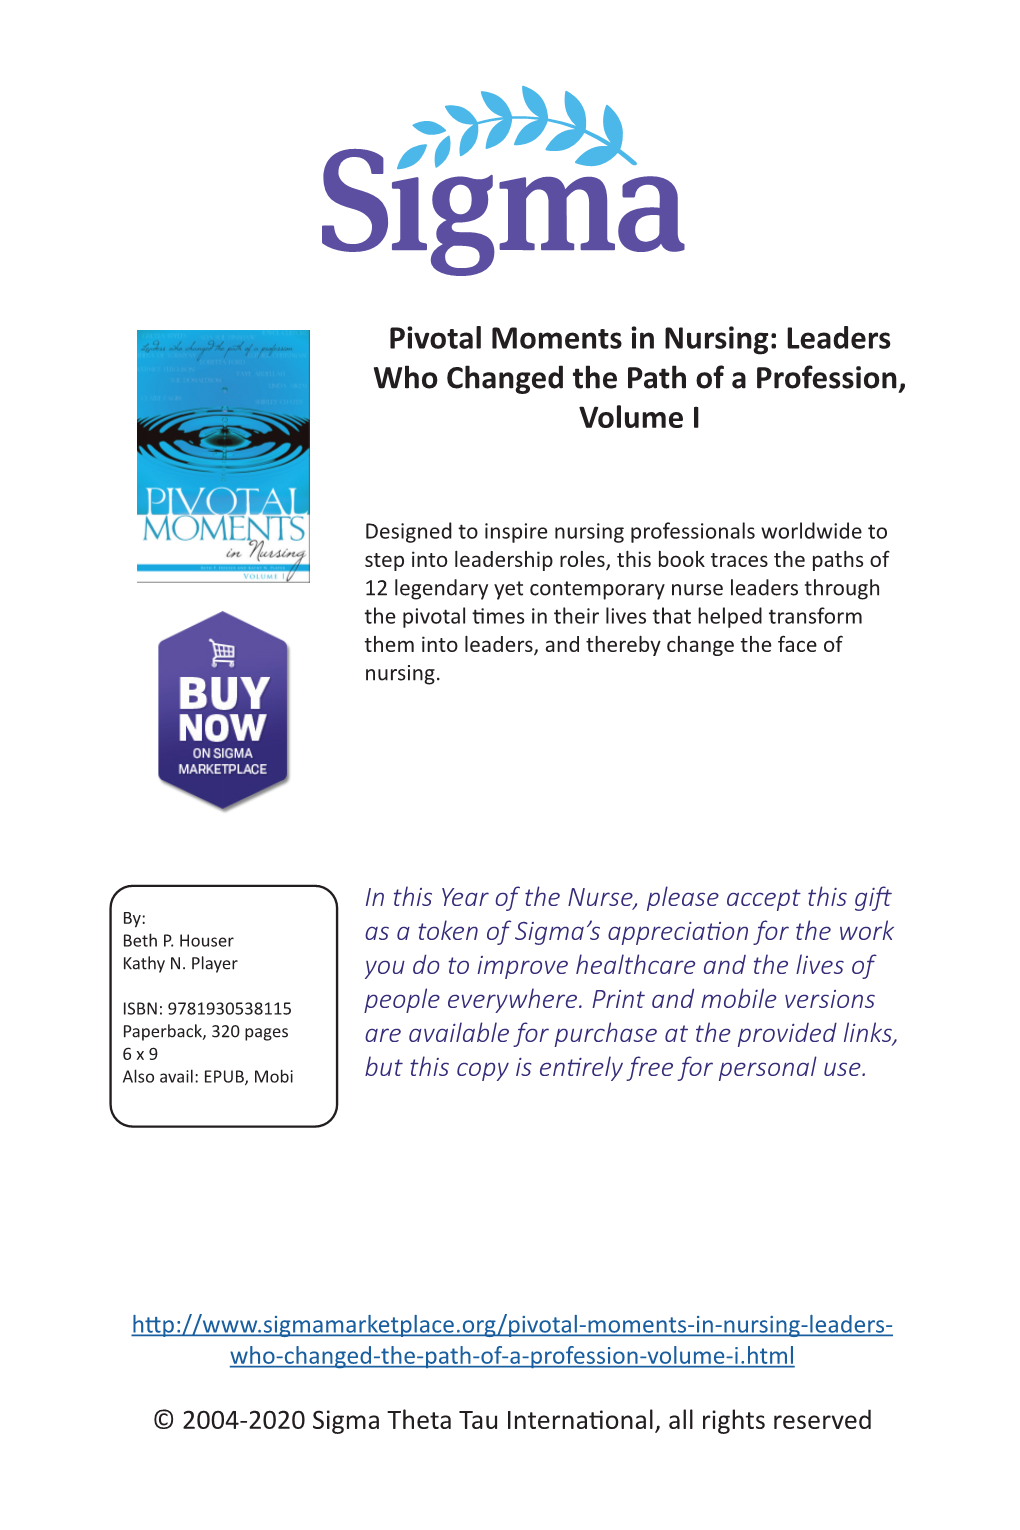 Pivotal Moments in Nursing: Leaders Who Changed the Path of a Profession, Volume I